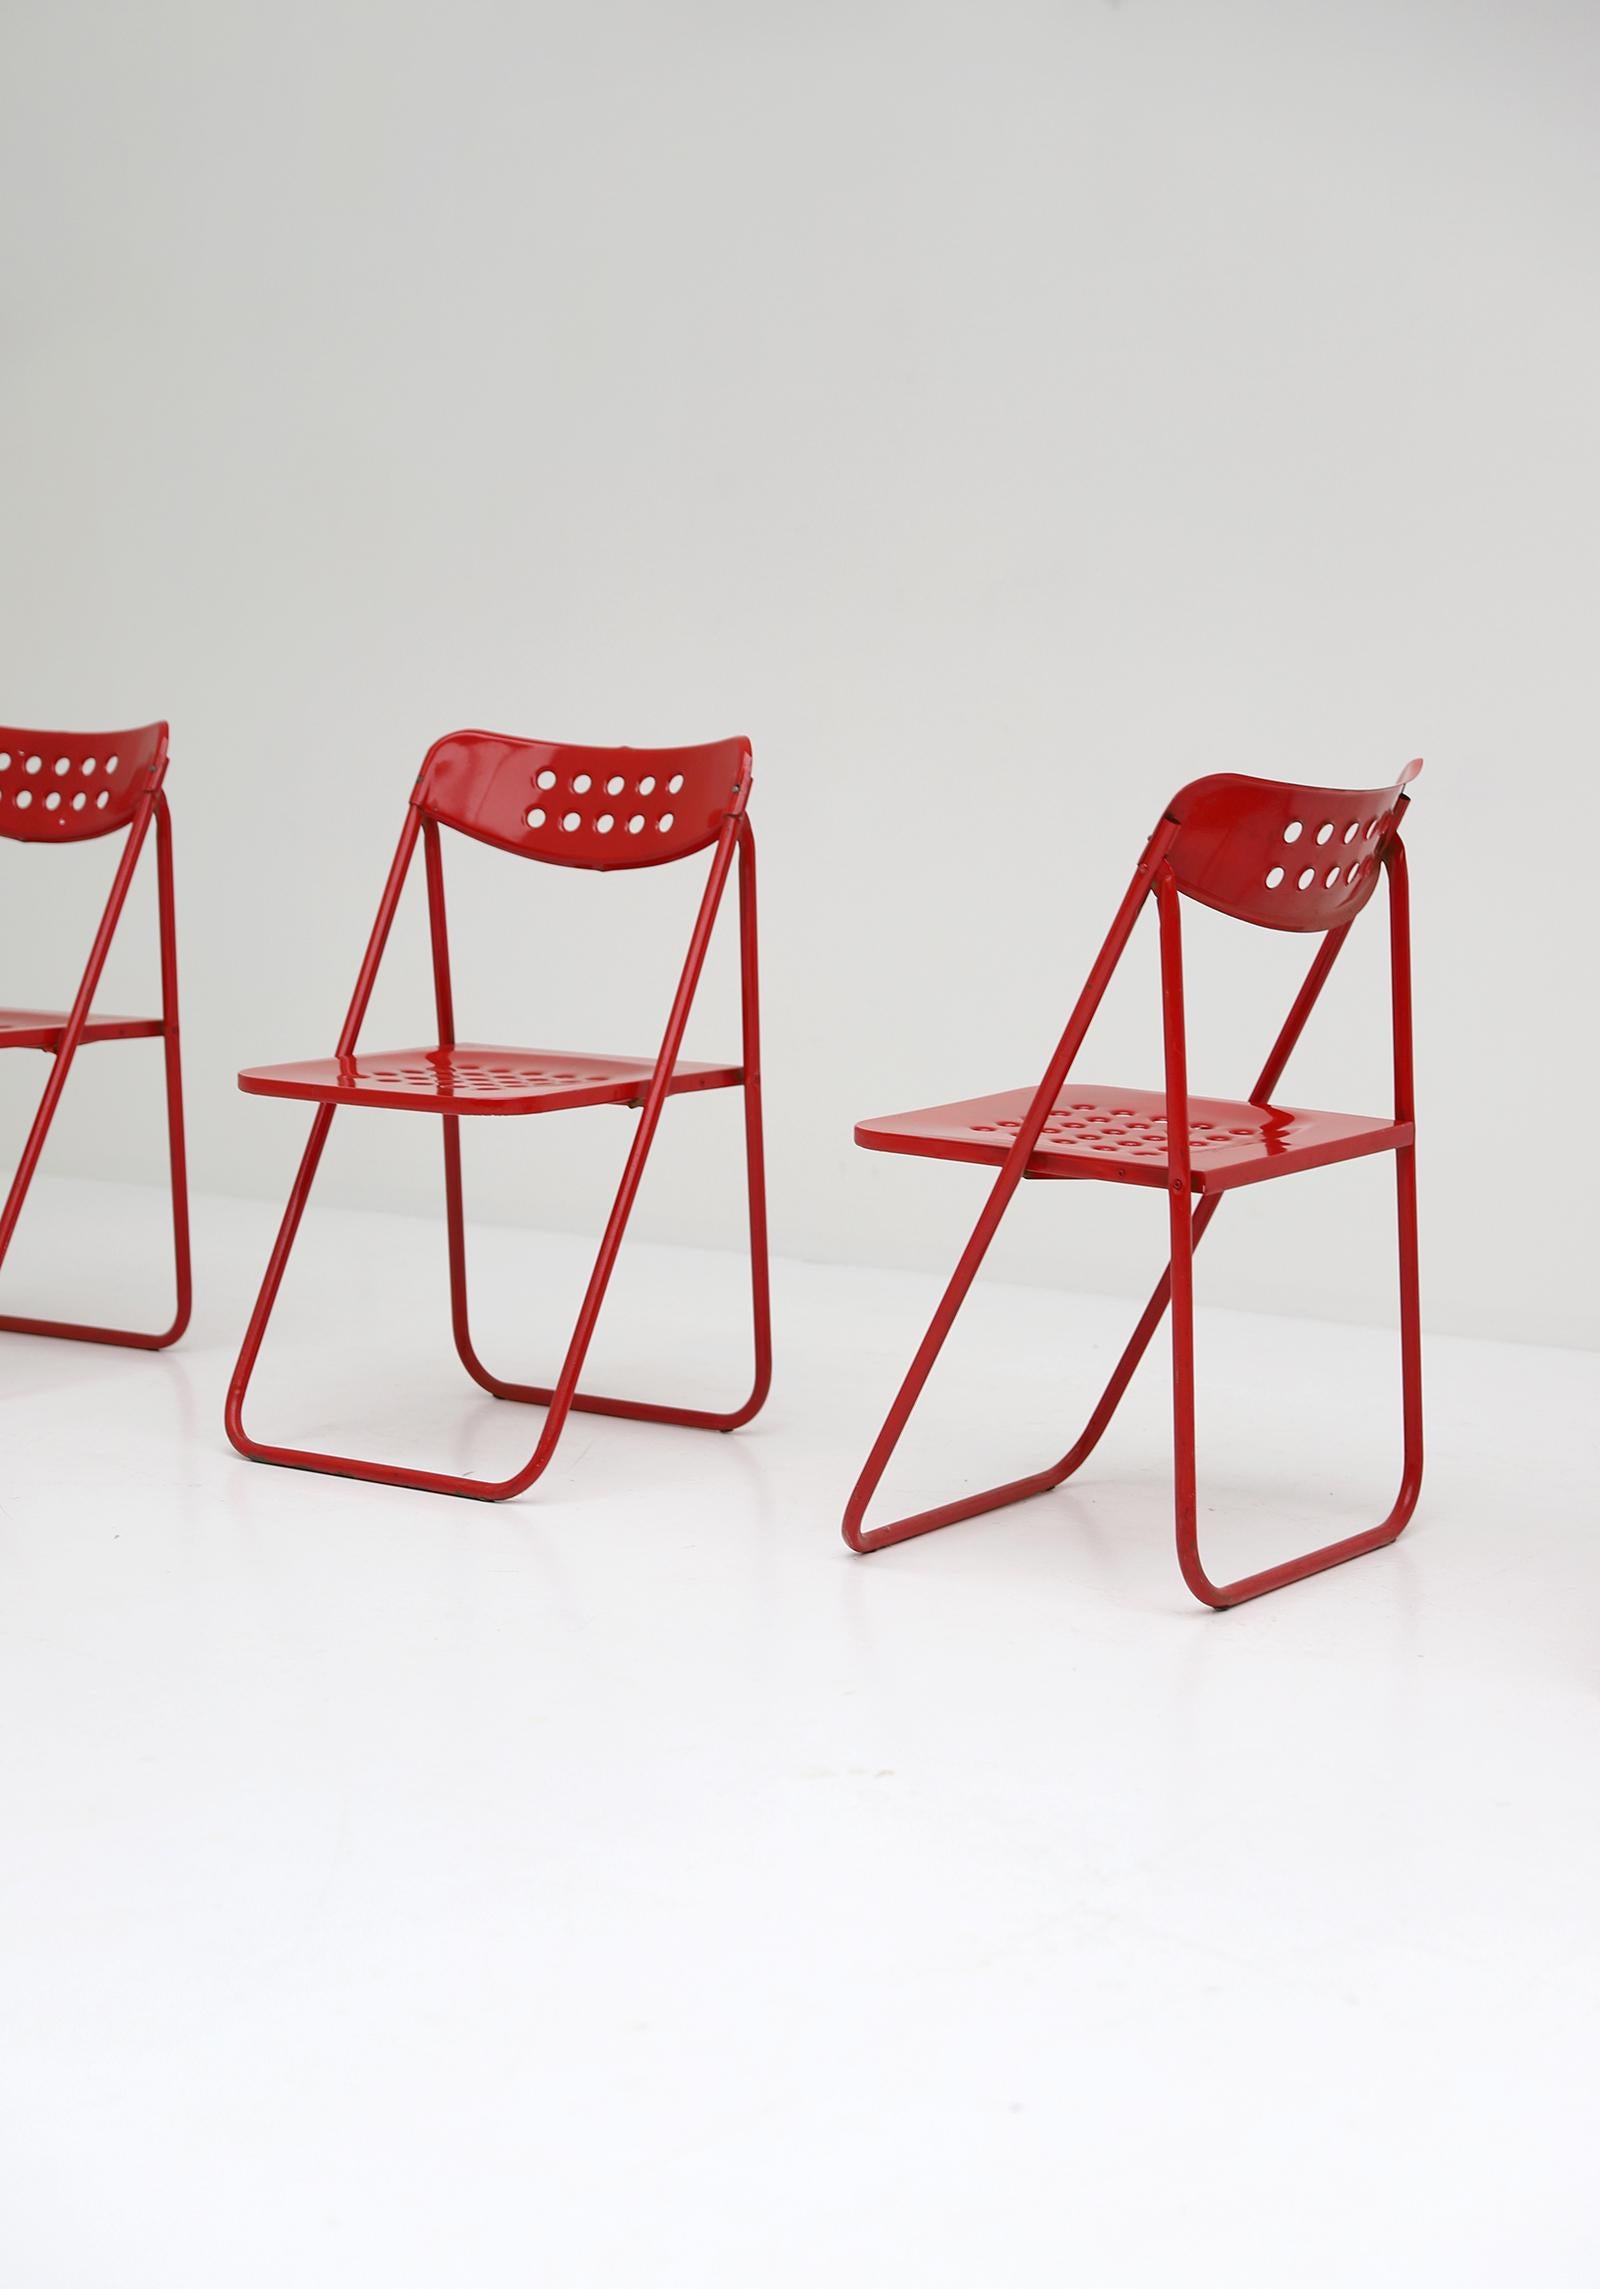 Set of Four Modern Red Lacquered Metal Folding Chairs 1980s For Sale 1